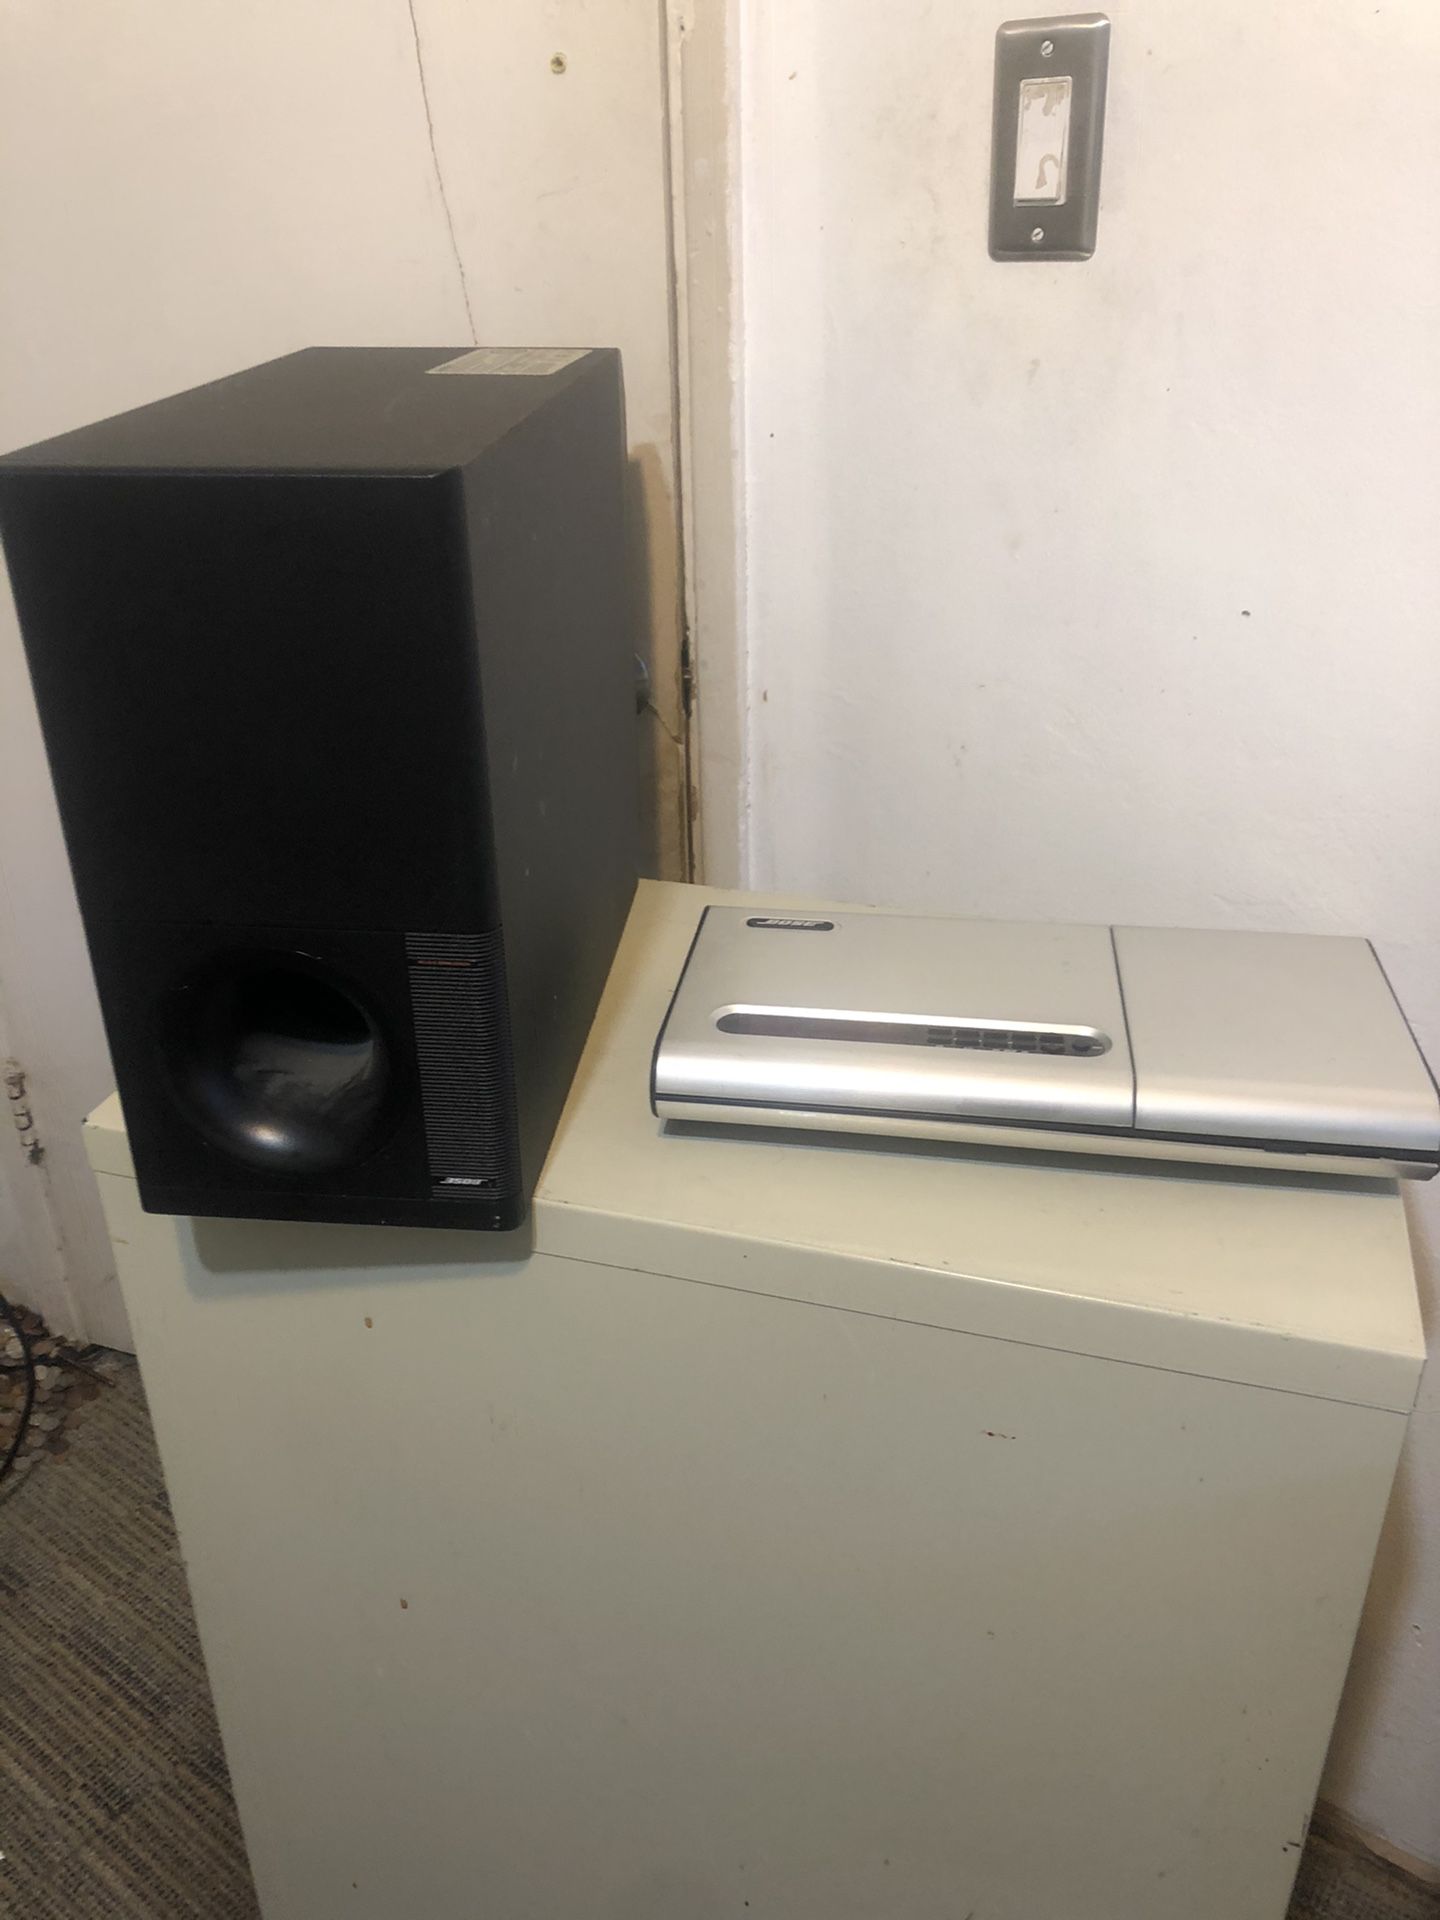 Boss 5 Speakers 1 CD Good Condition 300$